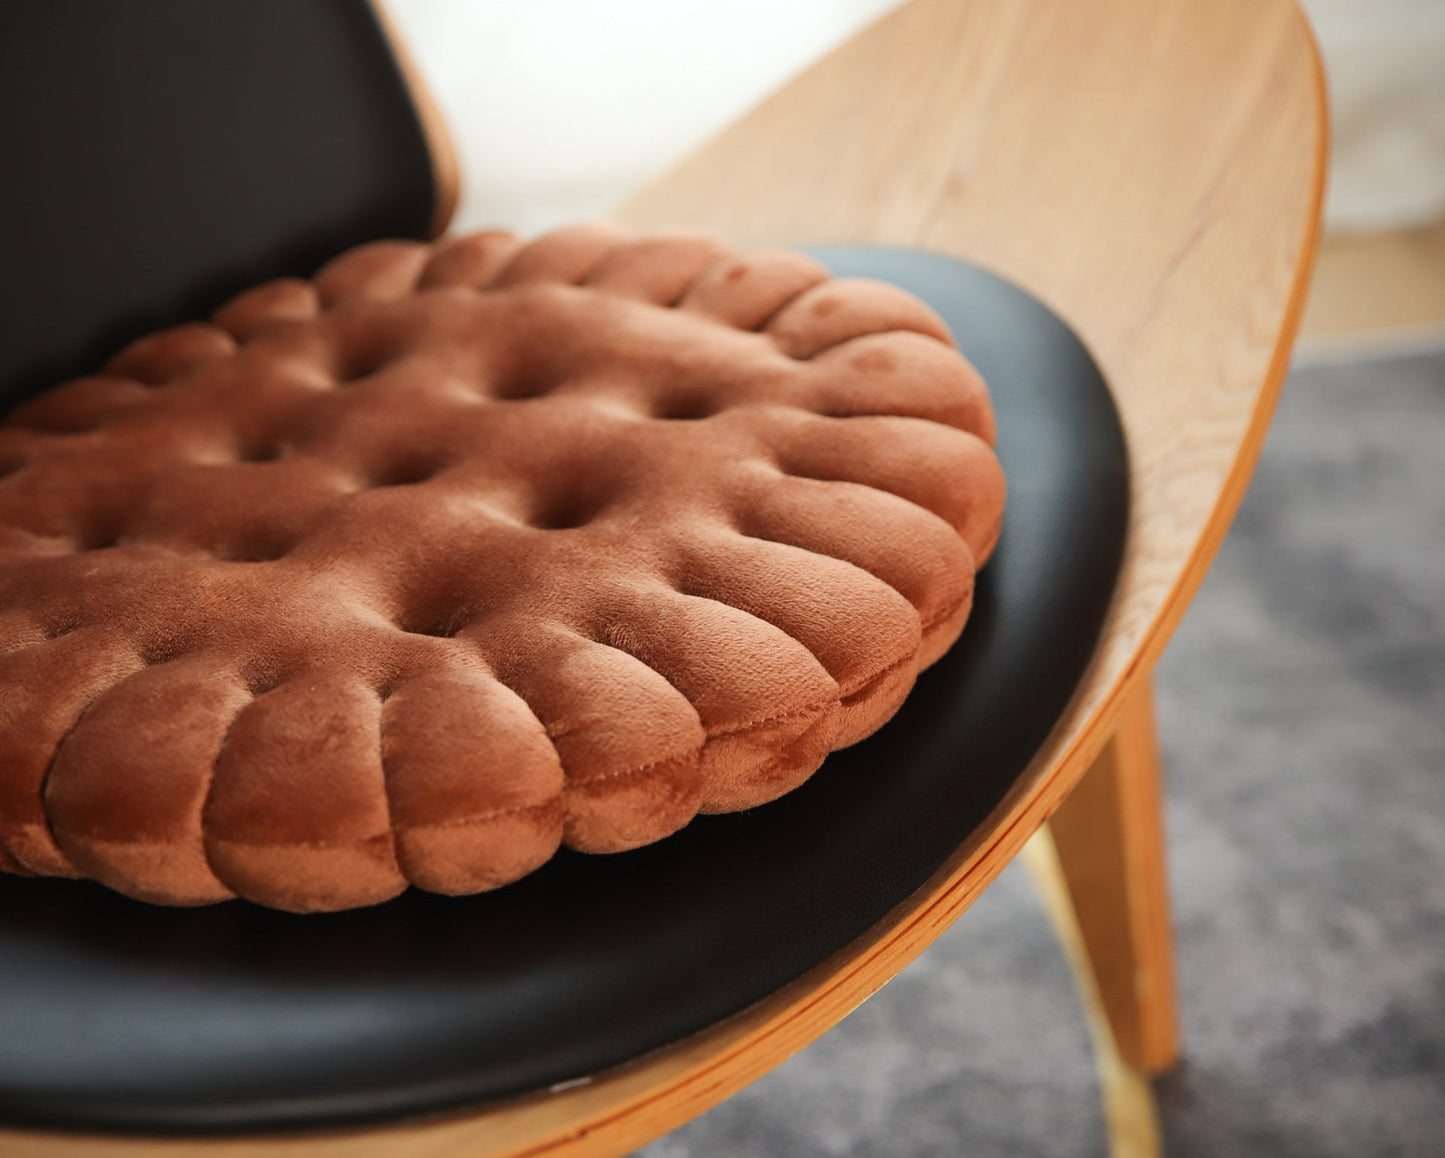 Japanese tatami biscuit chair cushion with thick cushion